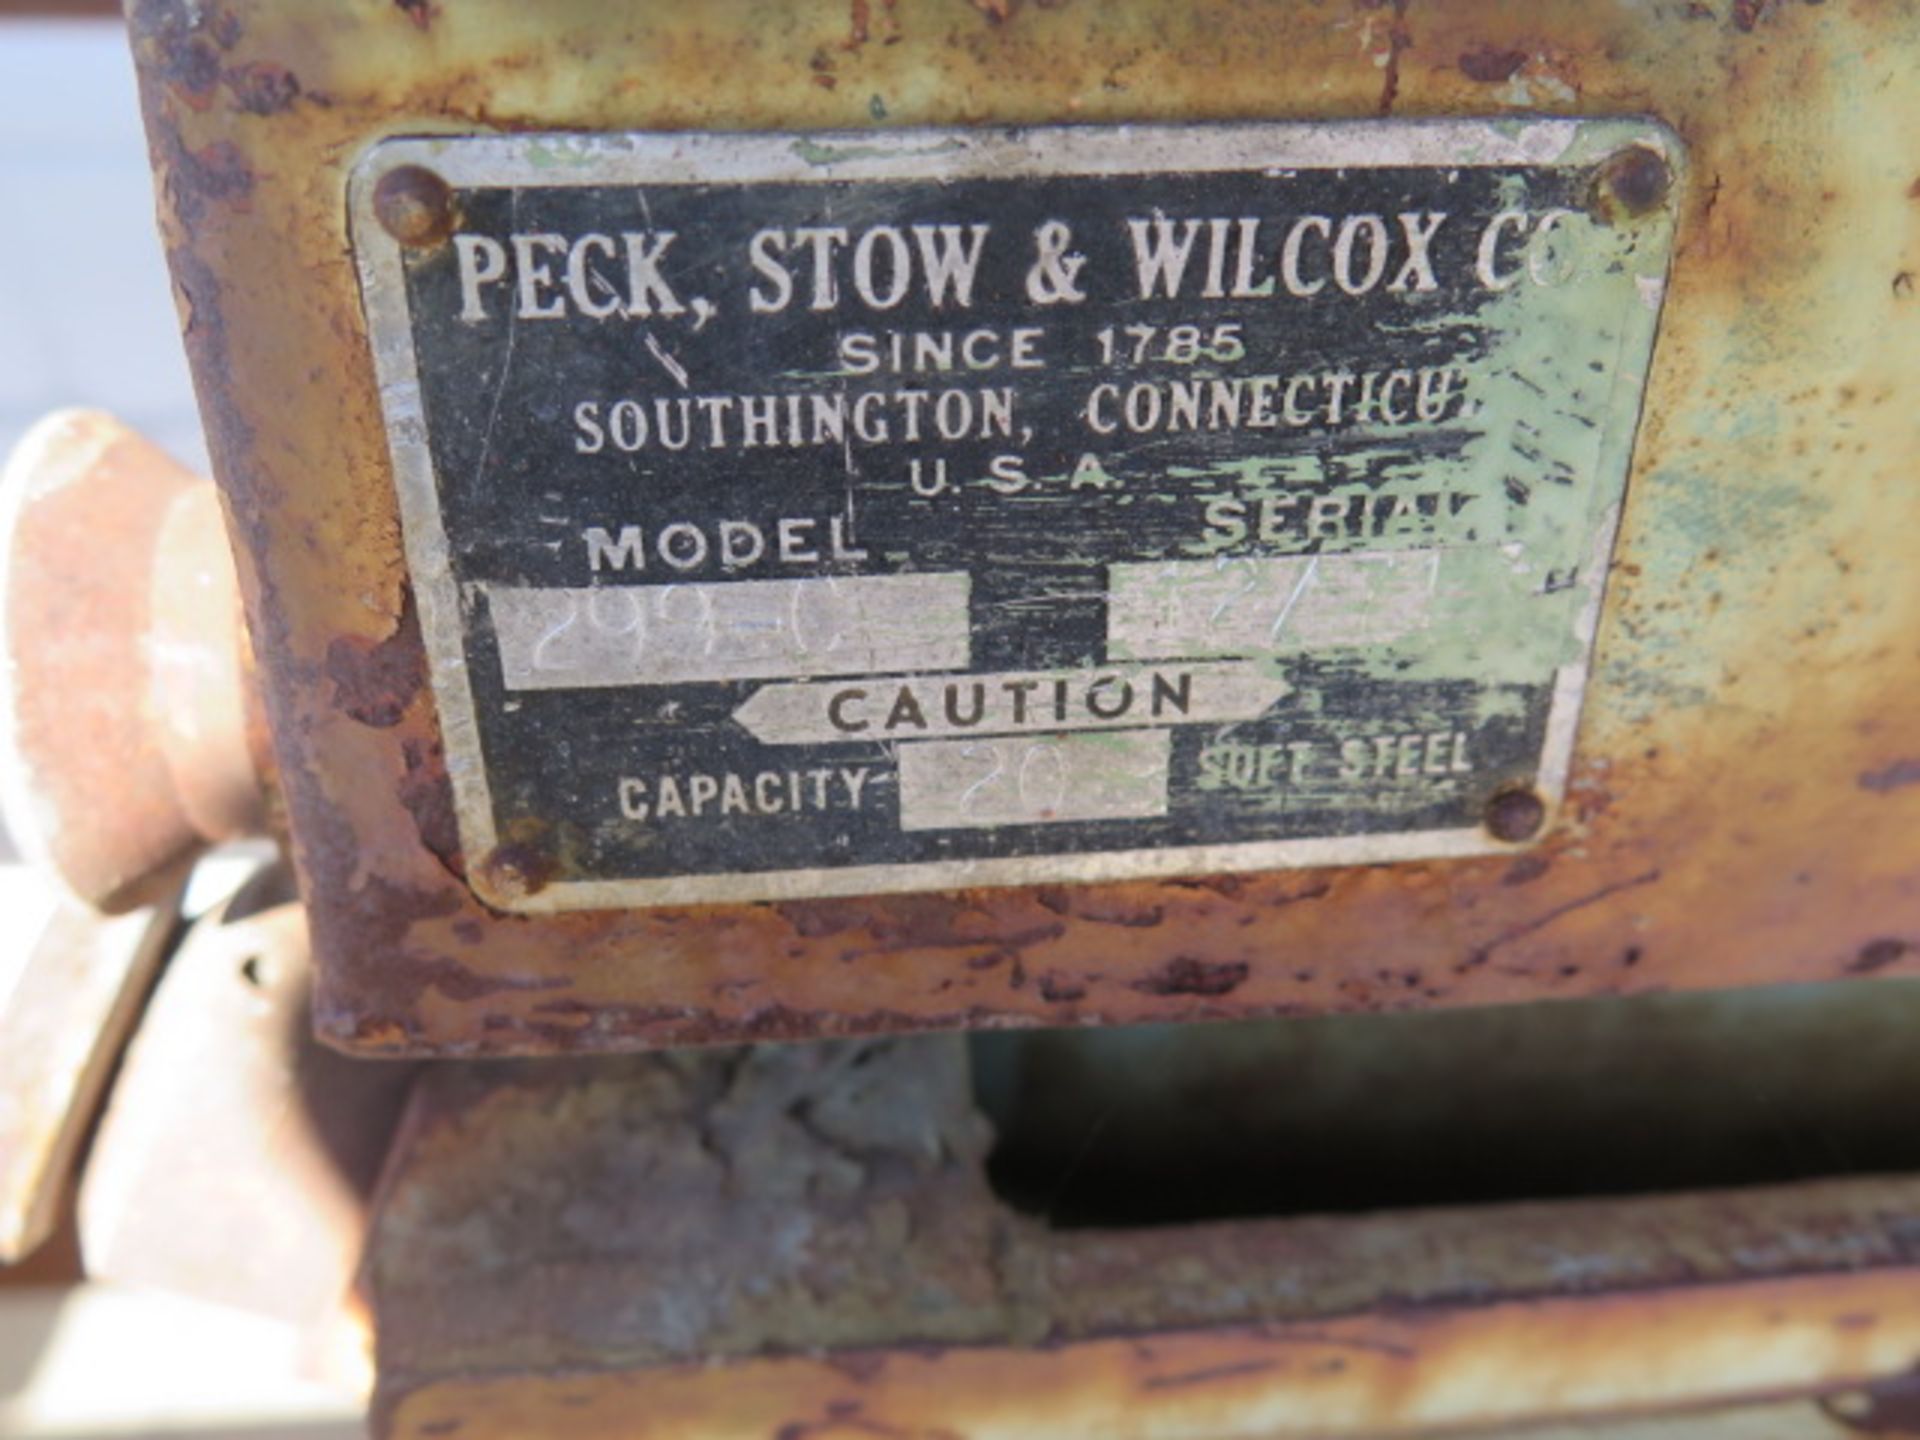 Pexto mdl. 299-C 20GA x 60” Circle Shear s/n 12/71 (SOLD AS-IS - NO WARRANTY) - Image 4 of 8